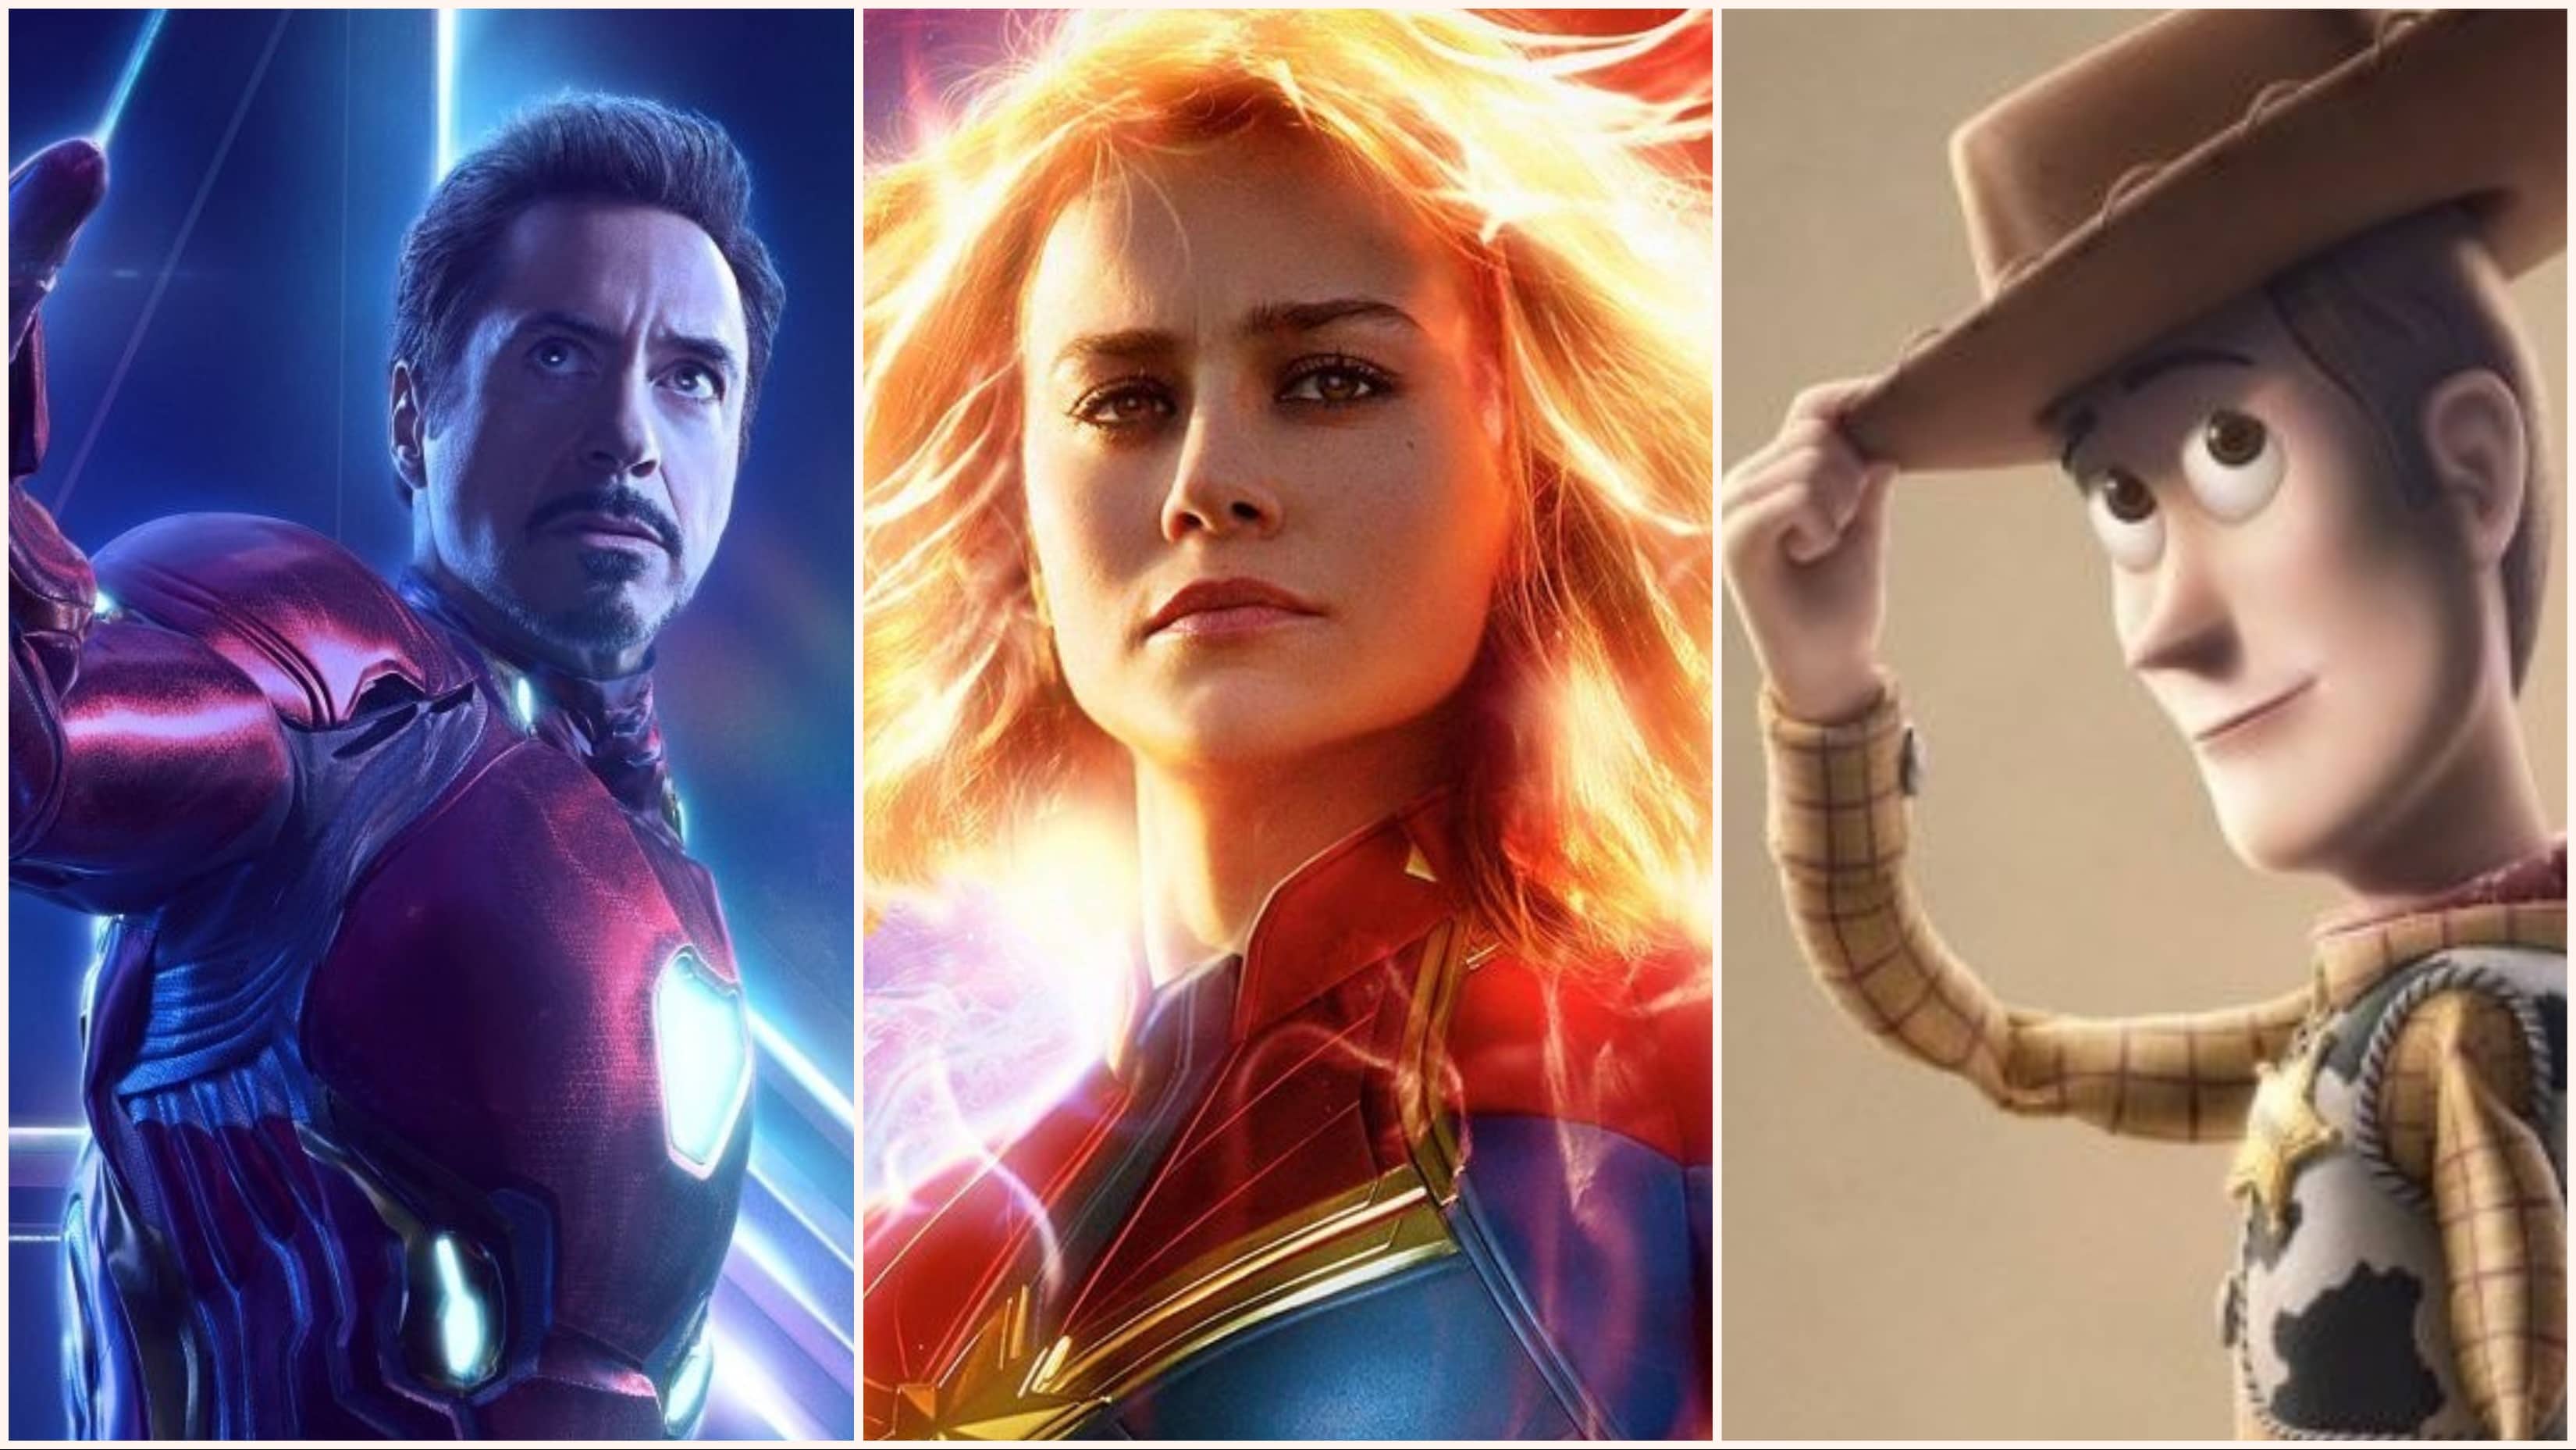 Check out our recap and rundown of this year's top movie and tv trailers from Super Bowl LII as well as watch every trailer from the big game!